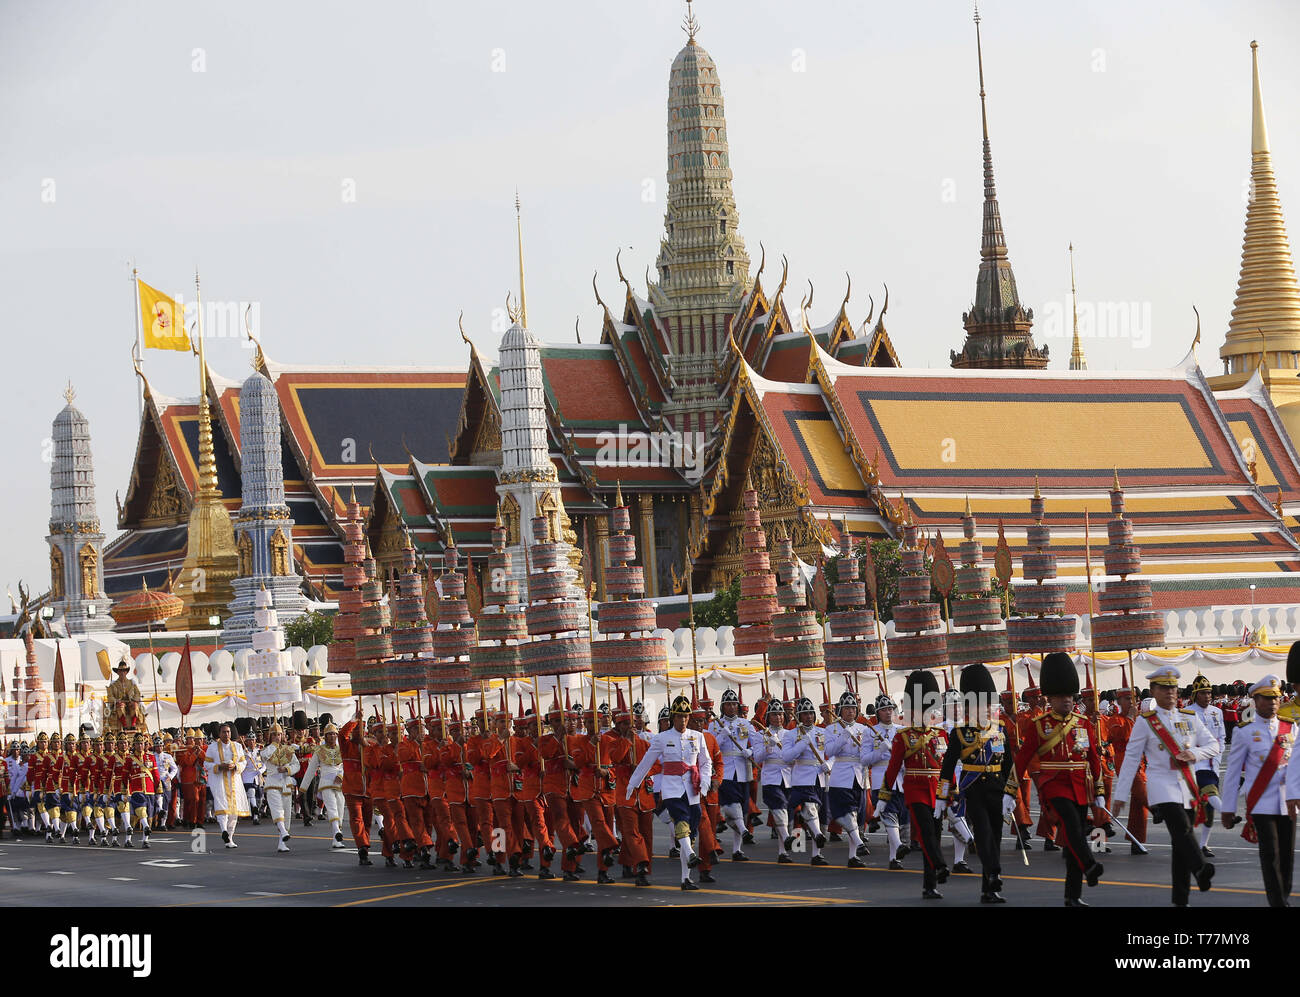 Bangkok, Thailand. 5th May, 2019. Guards of honor seen marching during Thailand's King Maha Vajiralongkorn Bodindradebayavarangkun (Rama X) coronation procession on land to encircle the city to give the people the opportunity to attend and pay homage to their new King. Credit: Chaiwat Subprasom/SOPA Images/ZUMA Wire/Alamy Live News Stock Photo